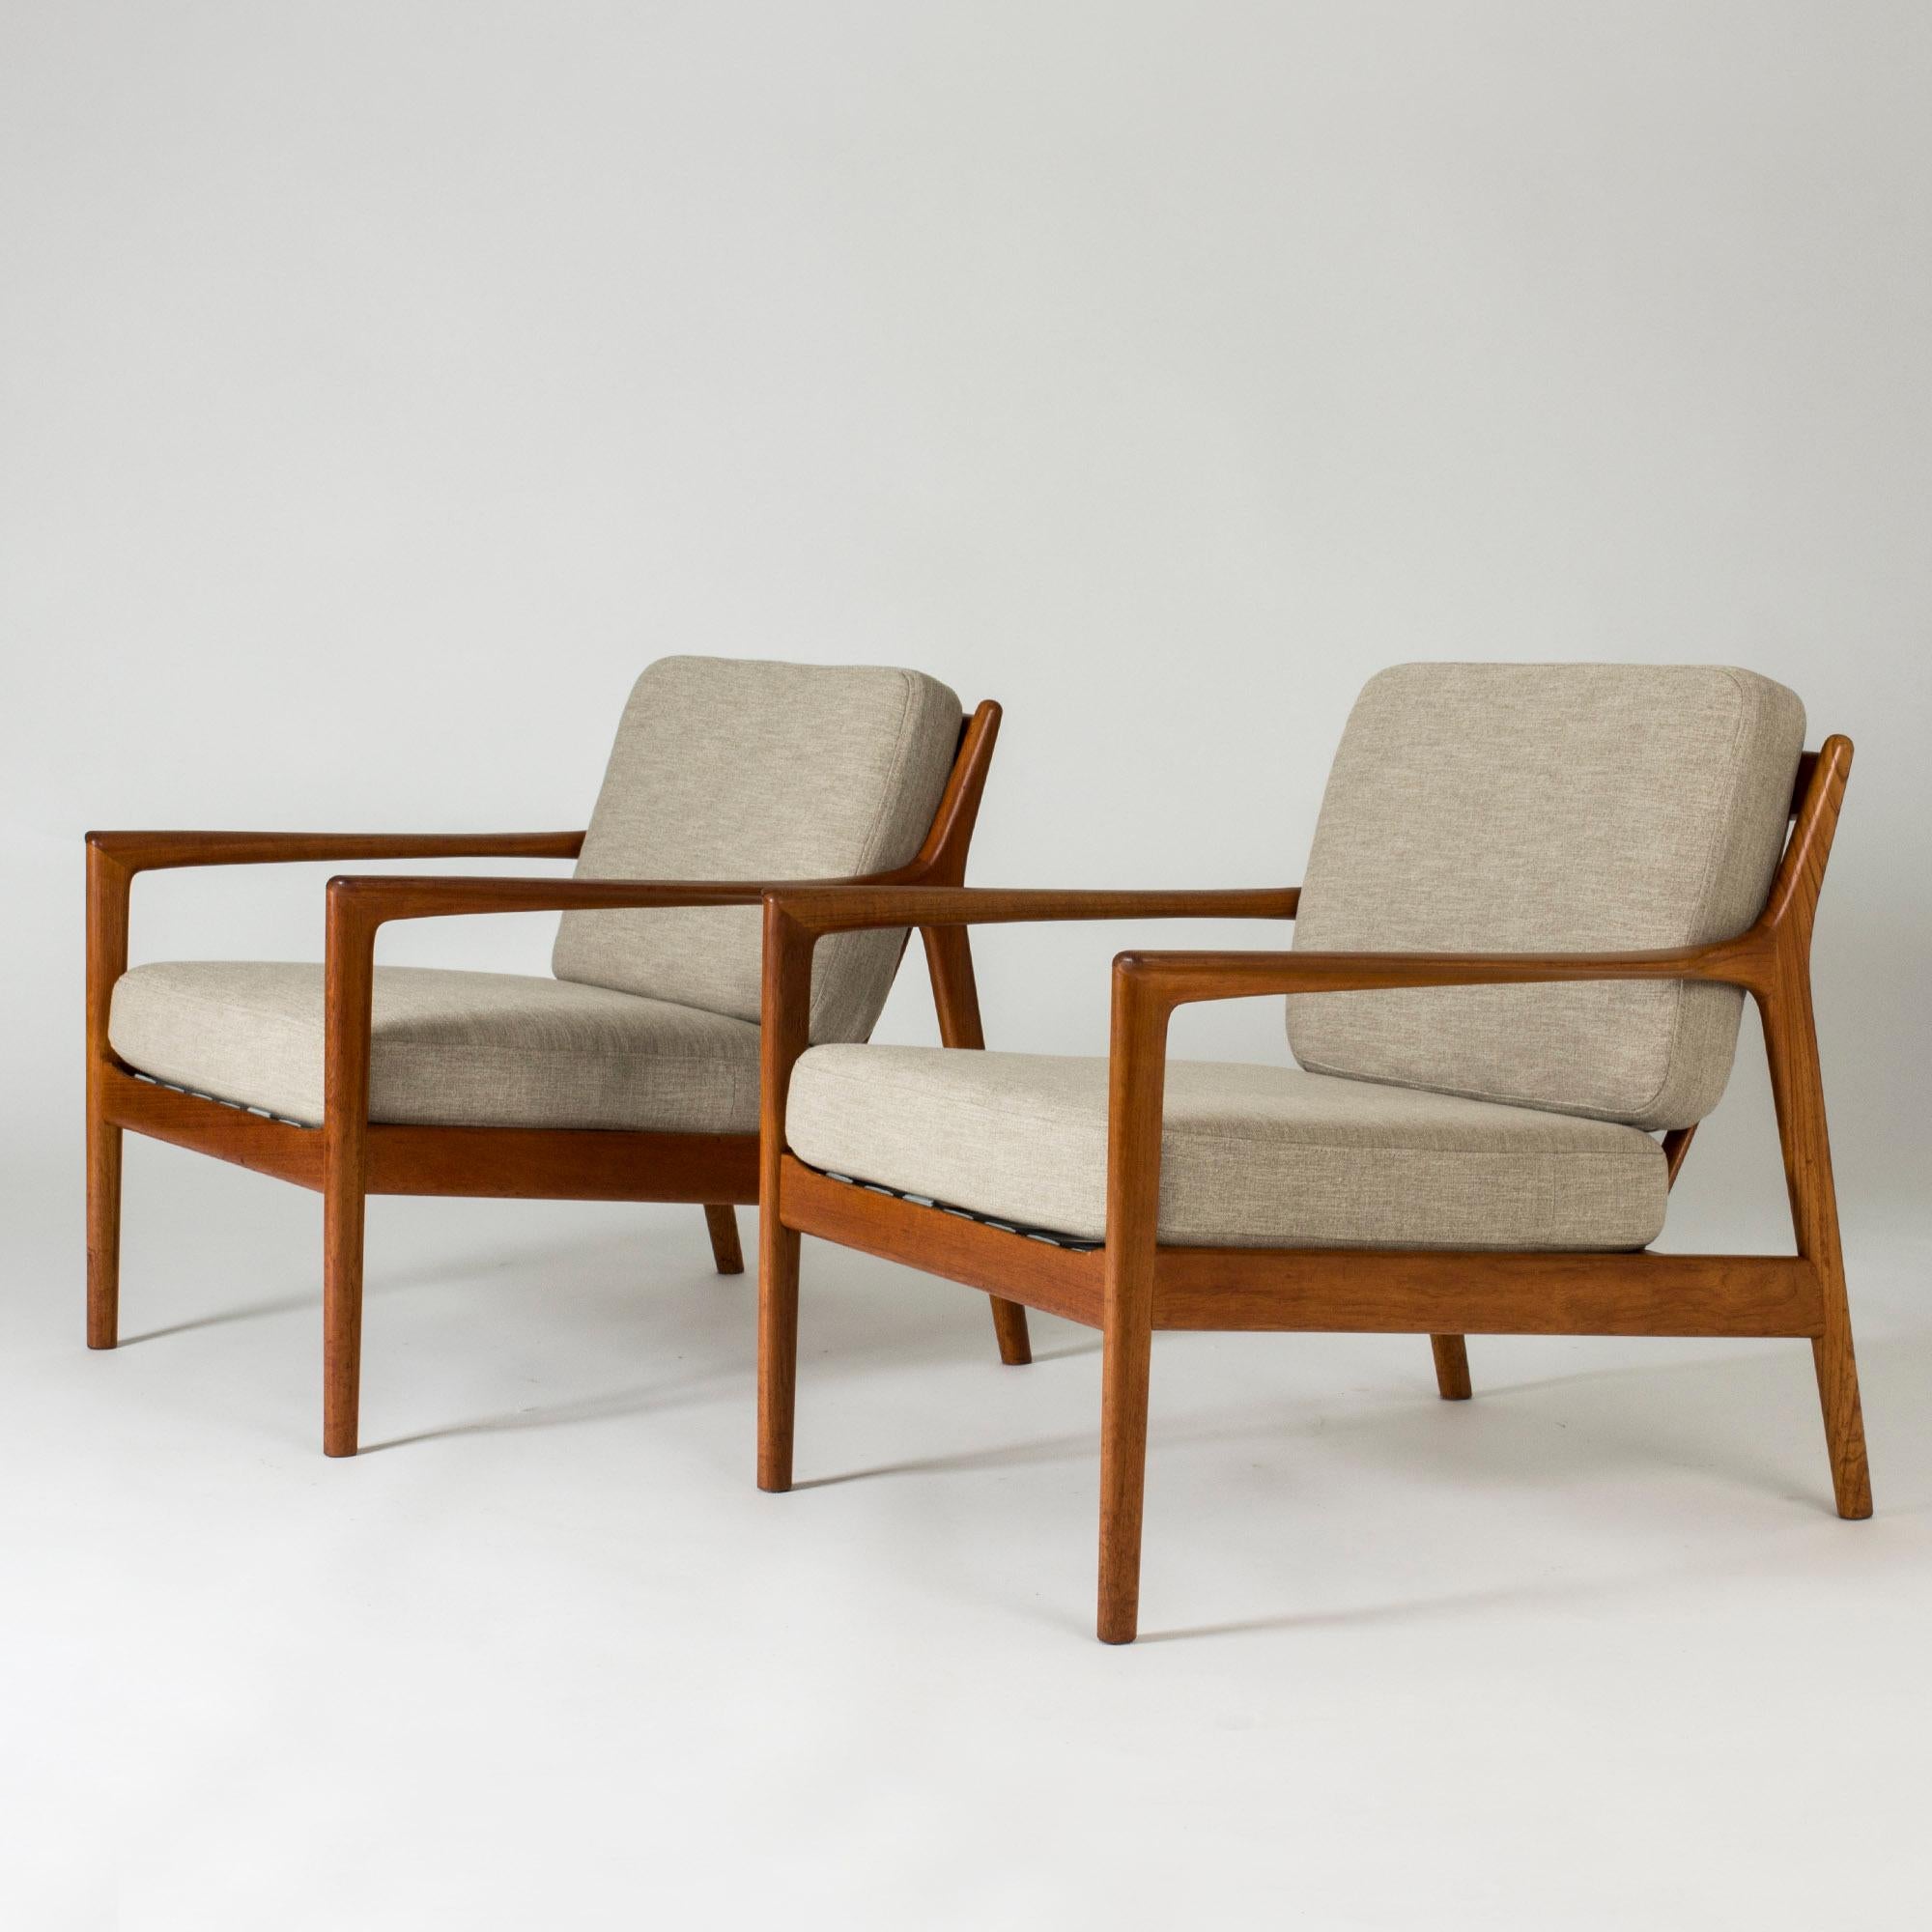 Pair of elegant and comfortable “USA 75” teak lounge chairs by Folke Ohlsson, with loose greige cushions. Beautifully sculpted armrests and ribbing in the back.